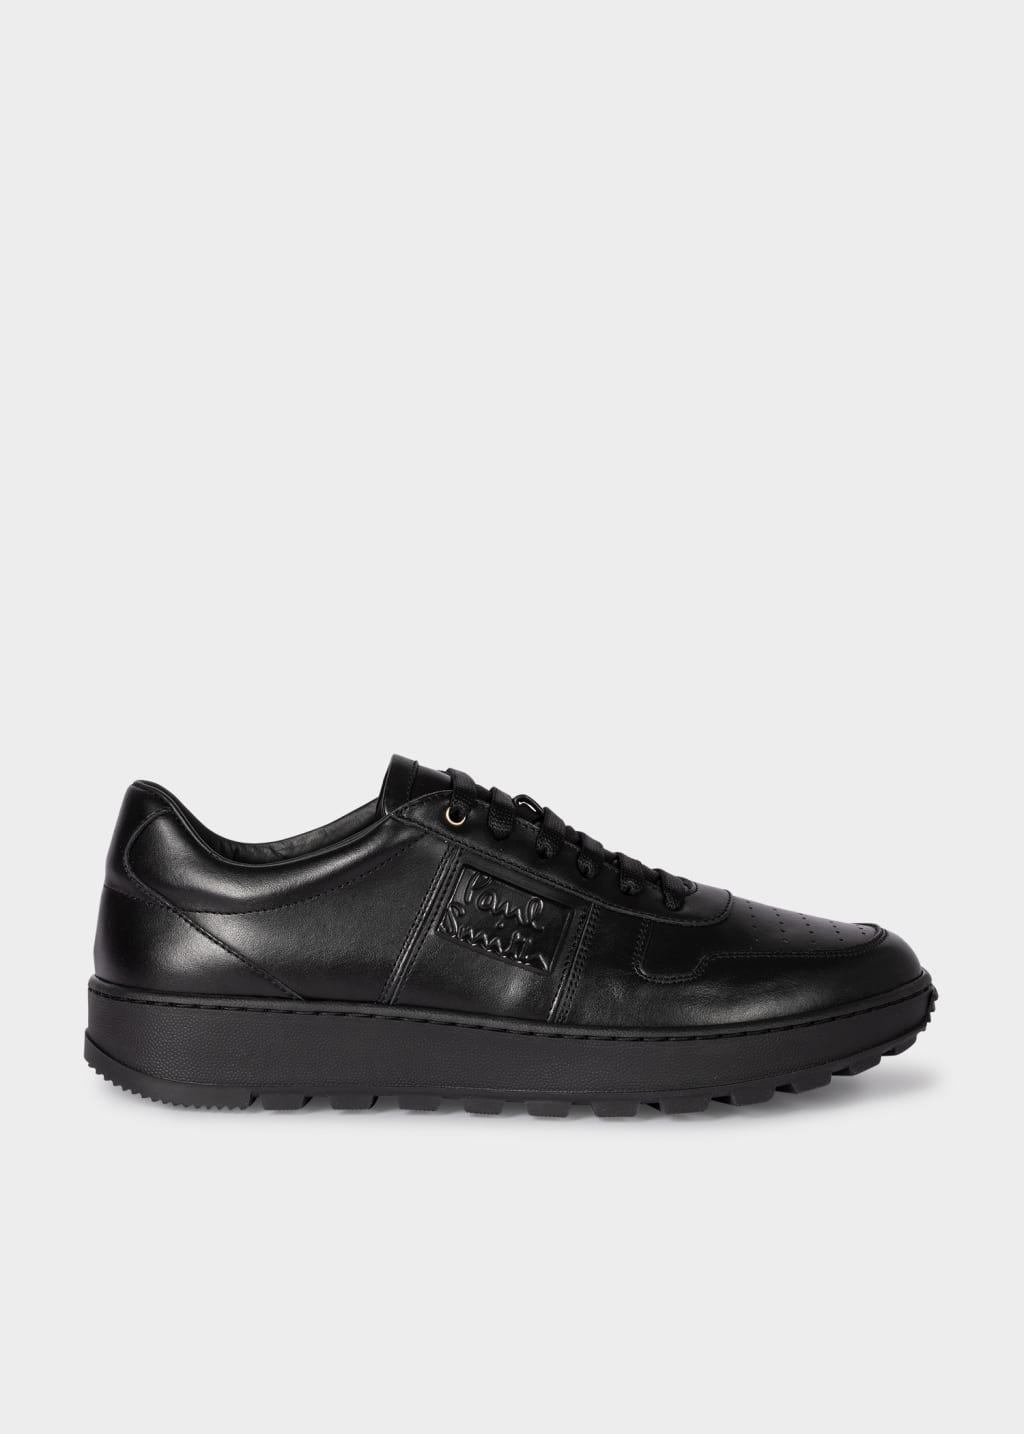 Detail View - Black Leather 'Filoni' Trainers Paul Smith